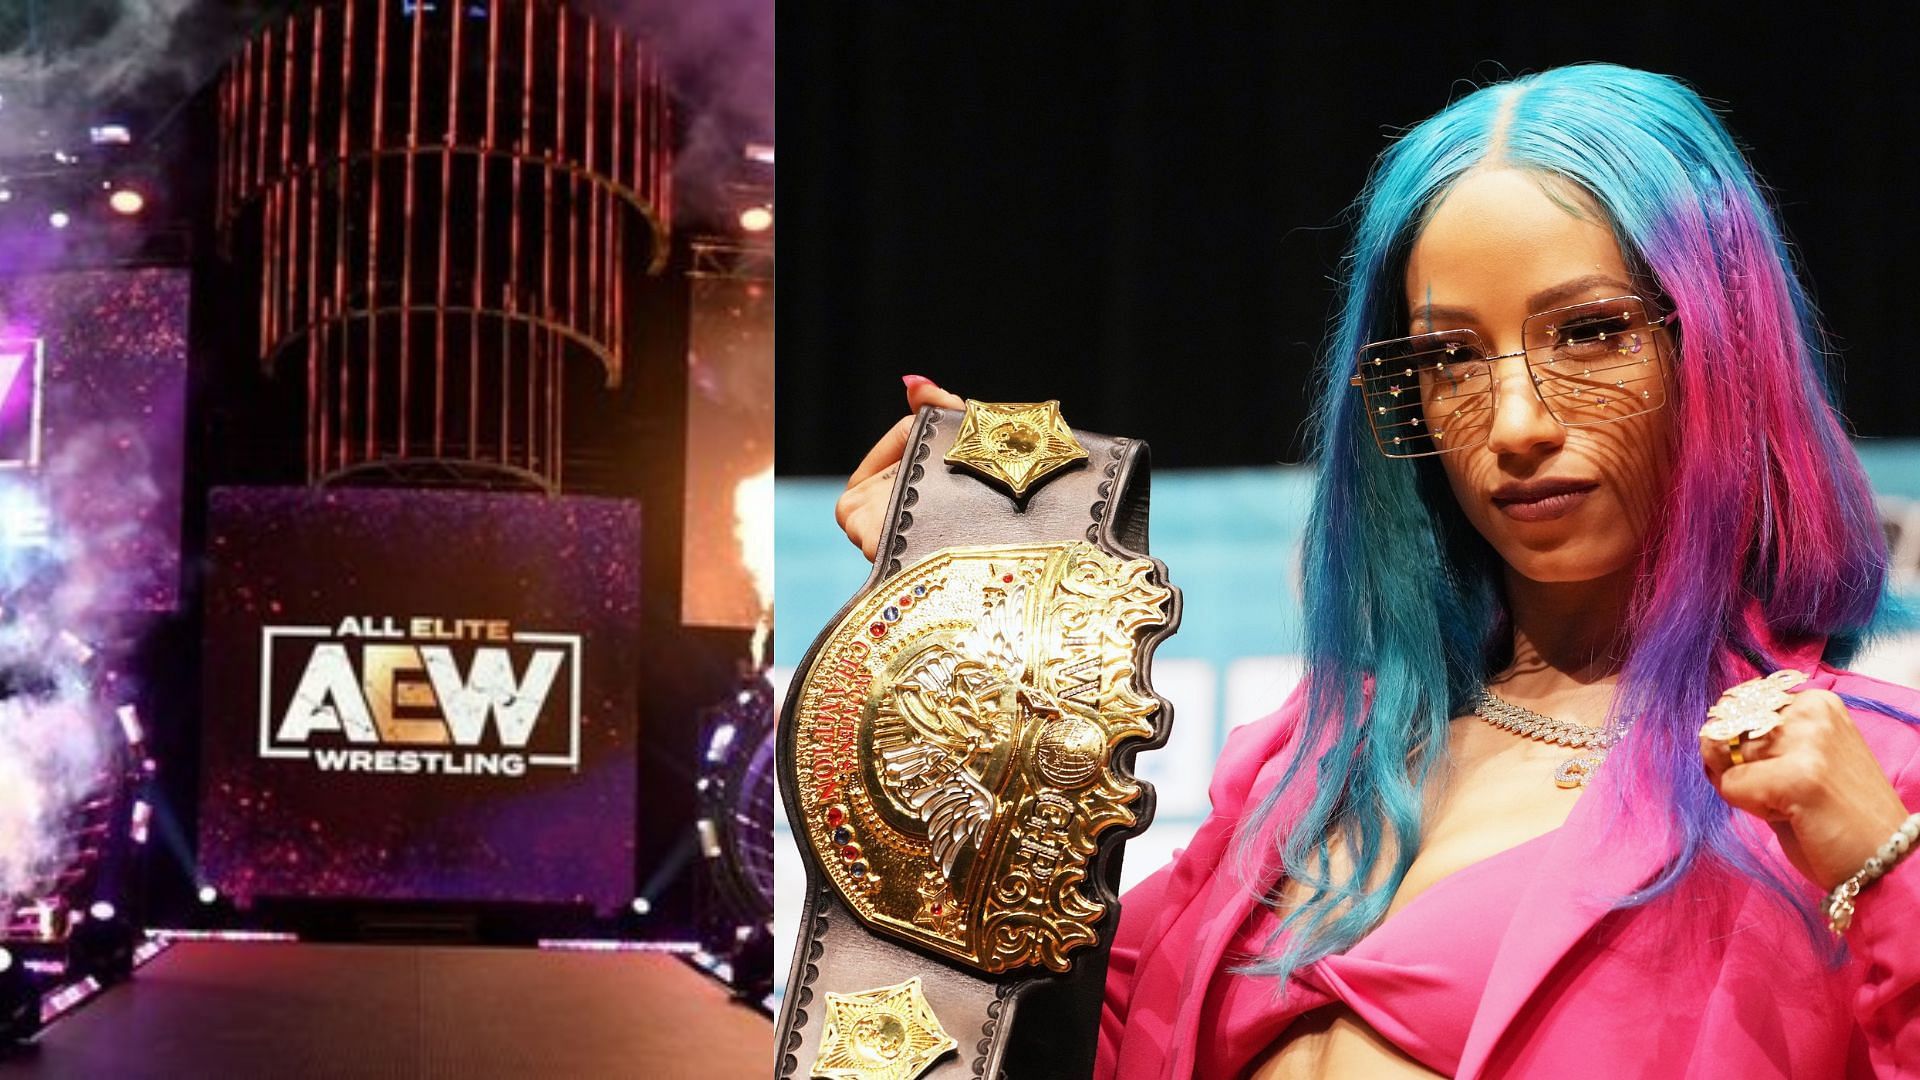 Mercedes Mone gets called out by top AEW star